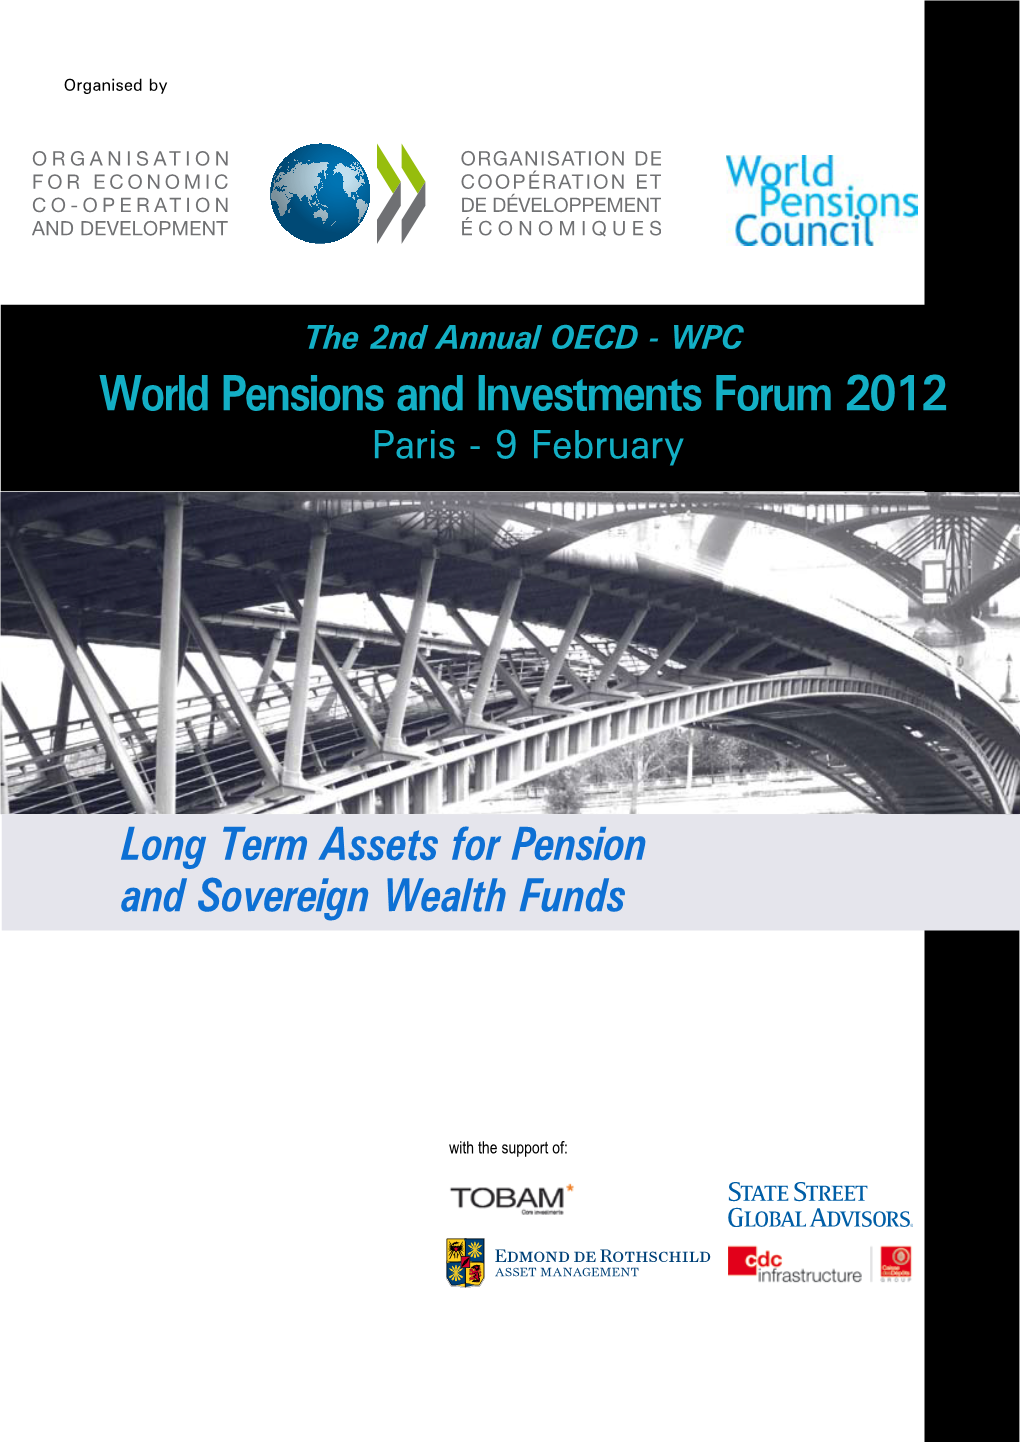 World Pensions and Investments Forum 2012 Paris - 9 February